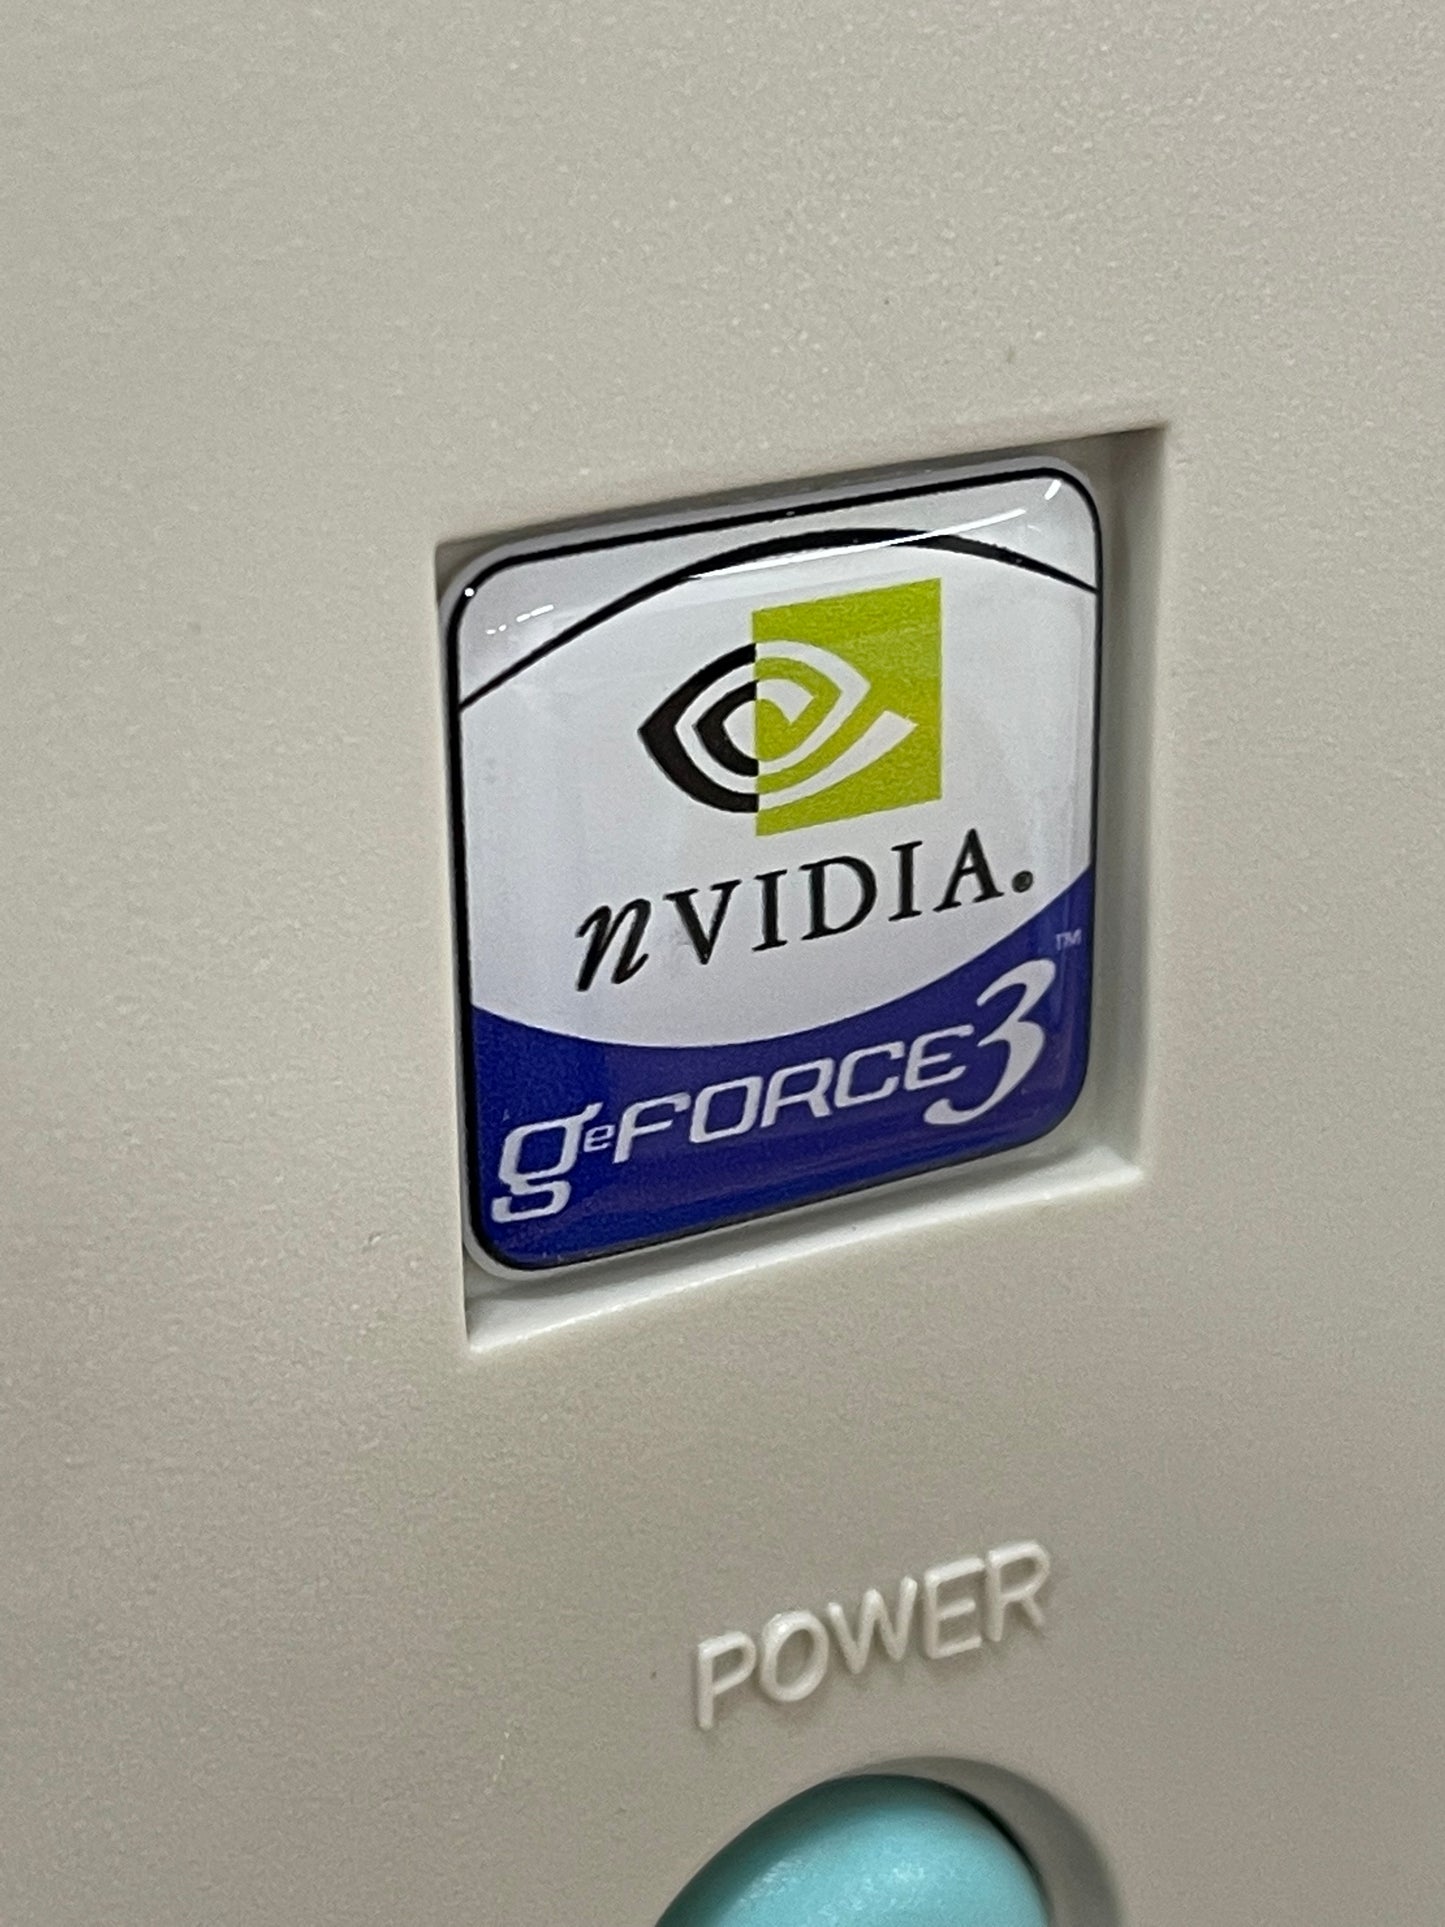 Nvidia Geforce3 General Video Graphics Case Badge Sticker - Dome